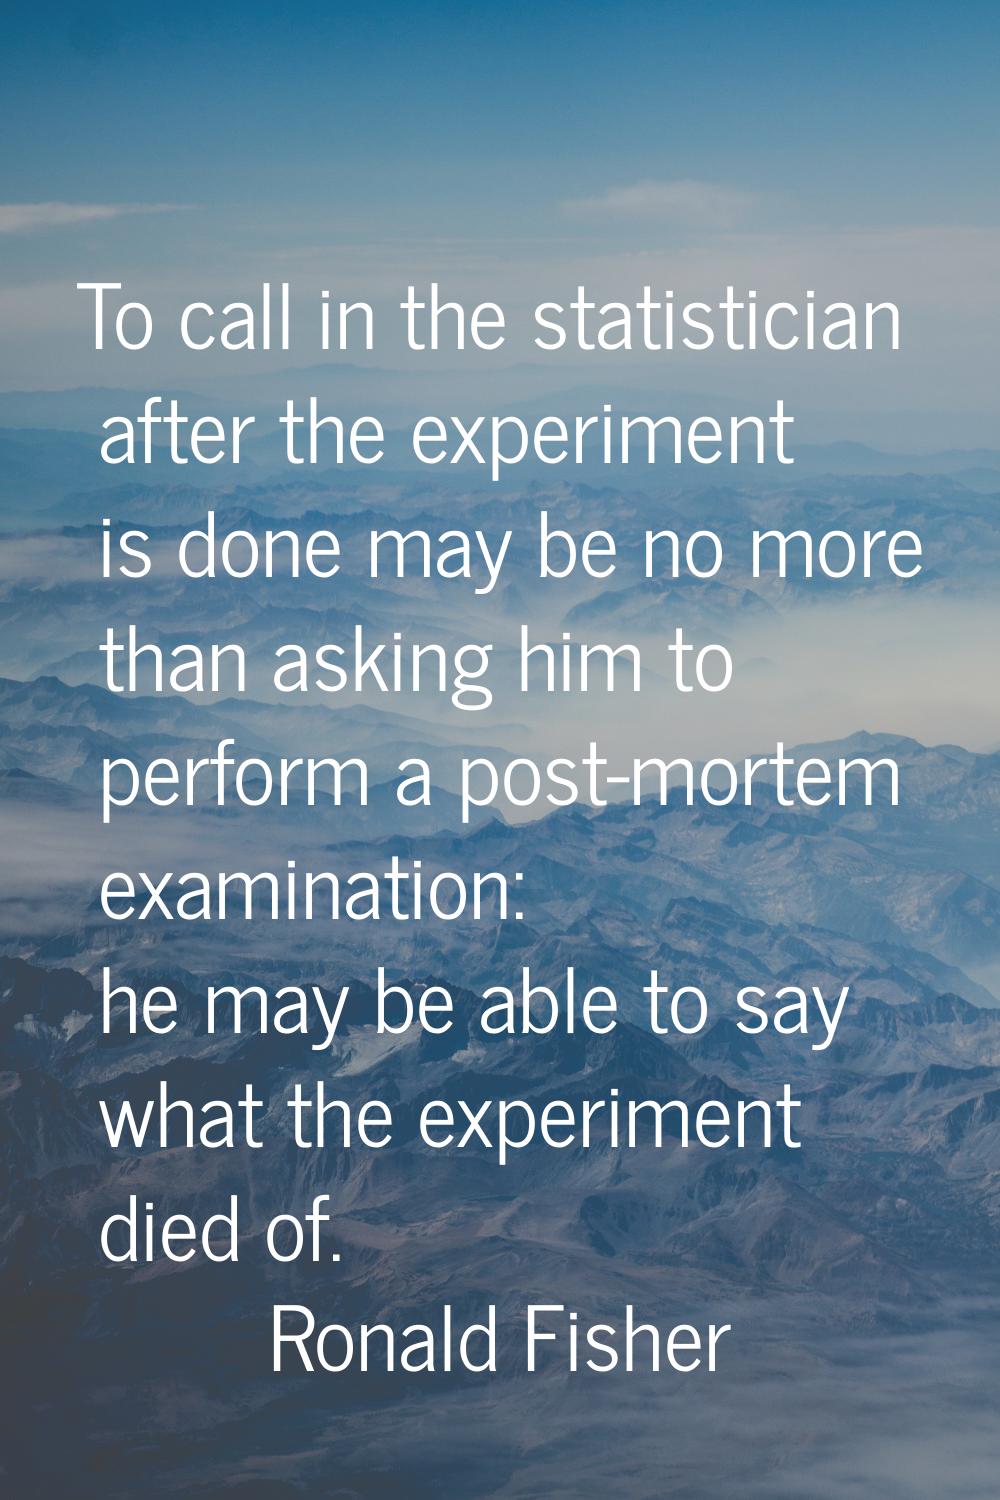 To call in the statistician after the experiment is done may be no more than asking him to perform 